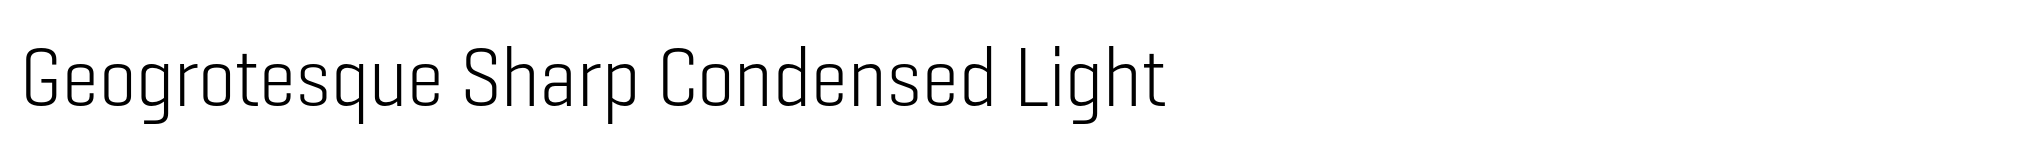 Geogrotesque Sharp Condensed Light image